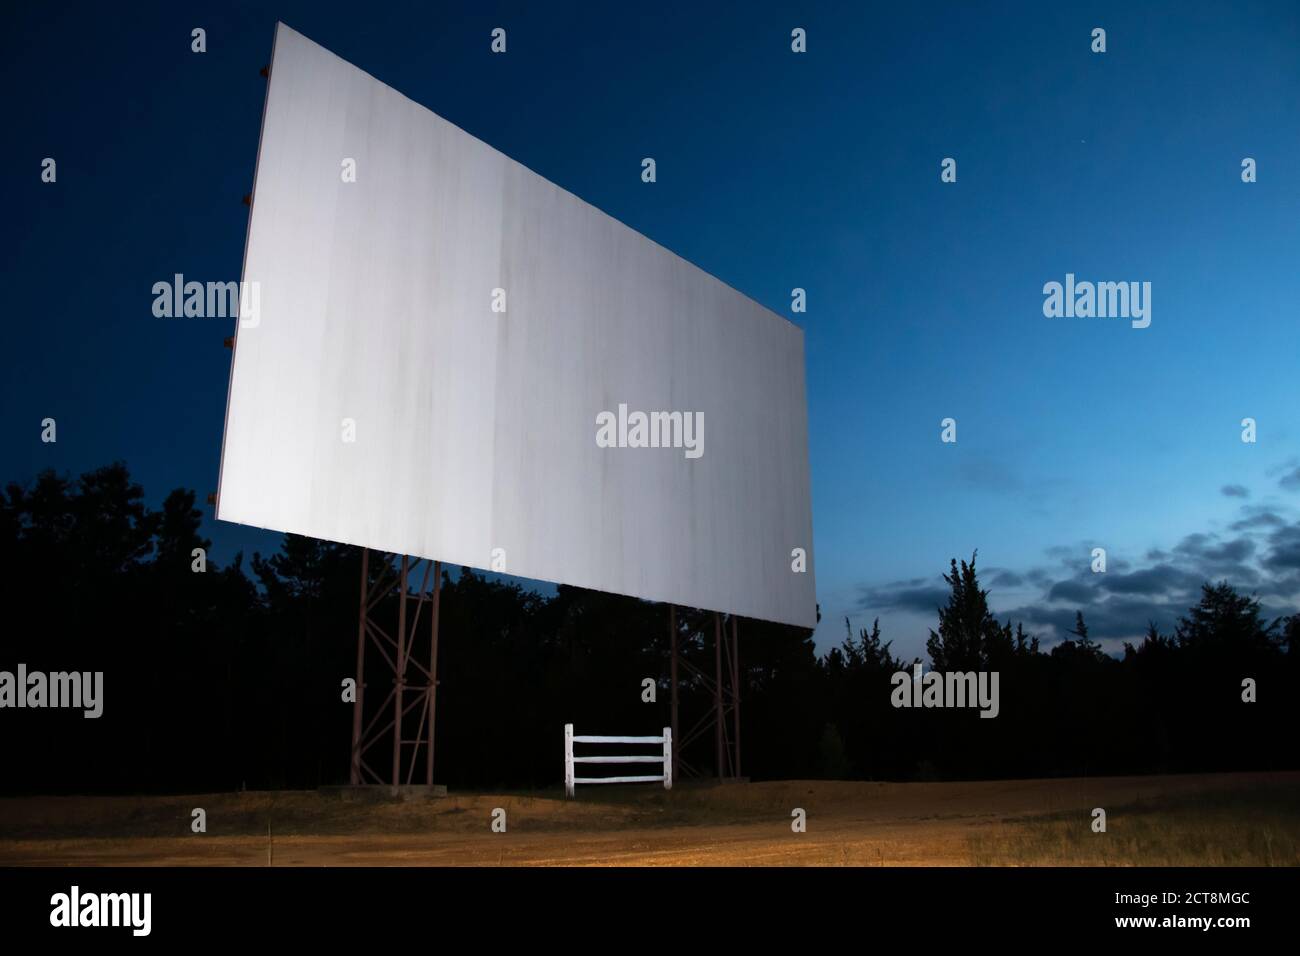 Blank white drive-in movie screen; evening twilight skies in the background. Stock Photo